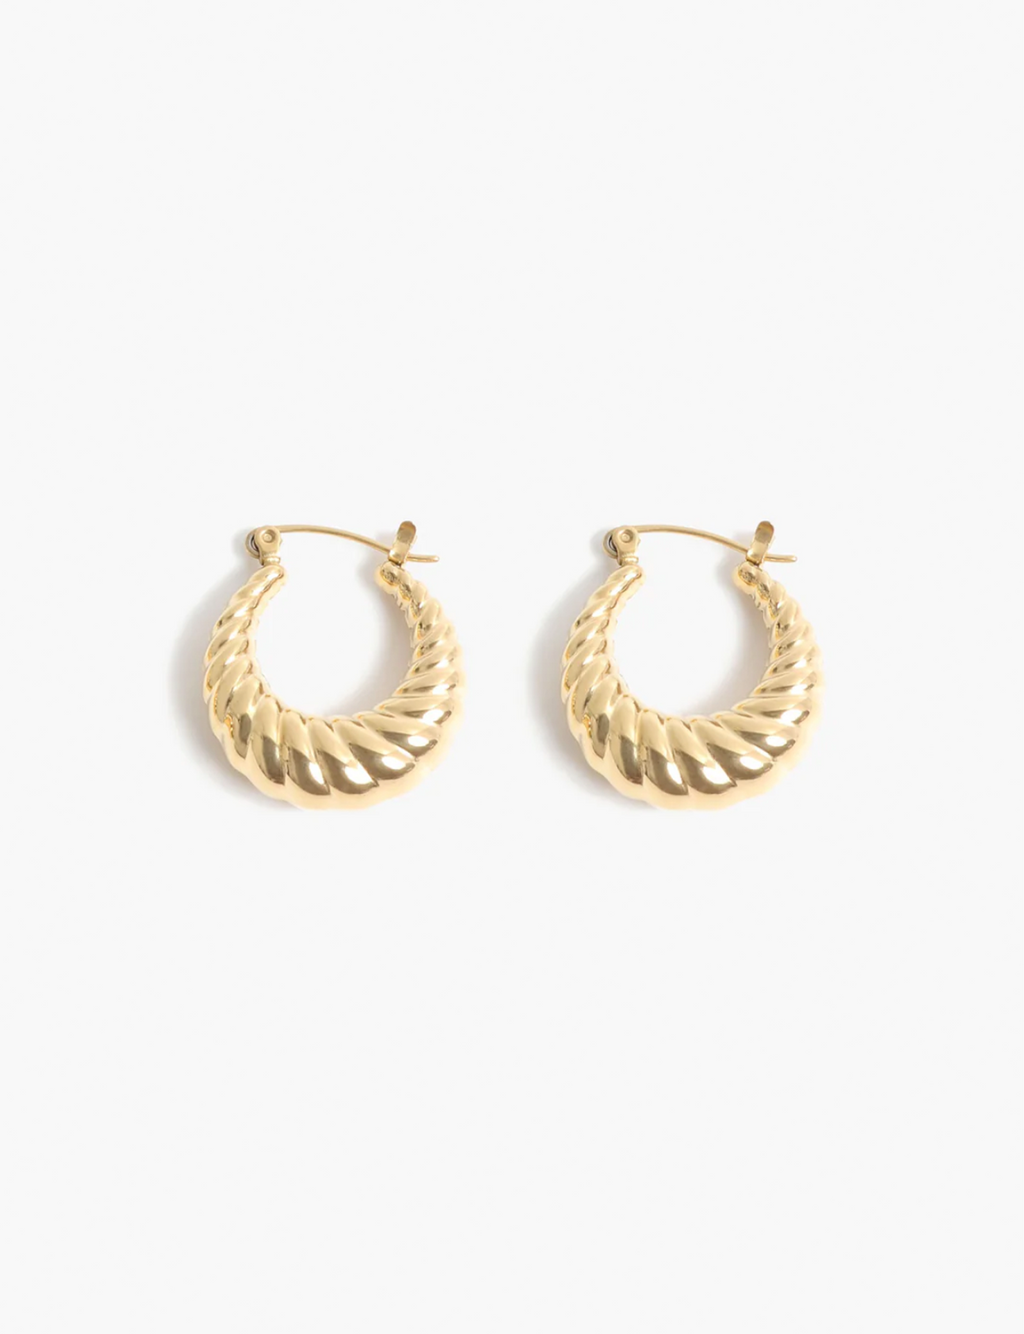 Halle Hoops 1", Gold Plated